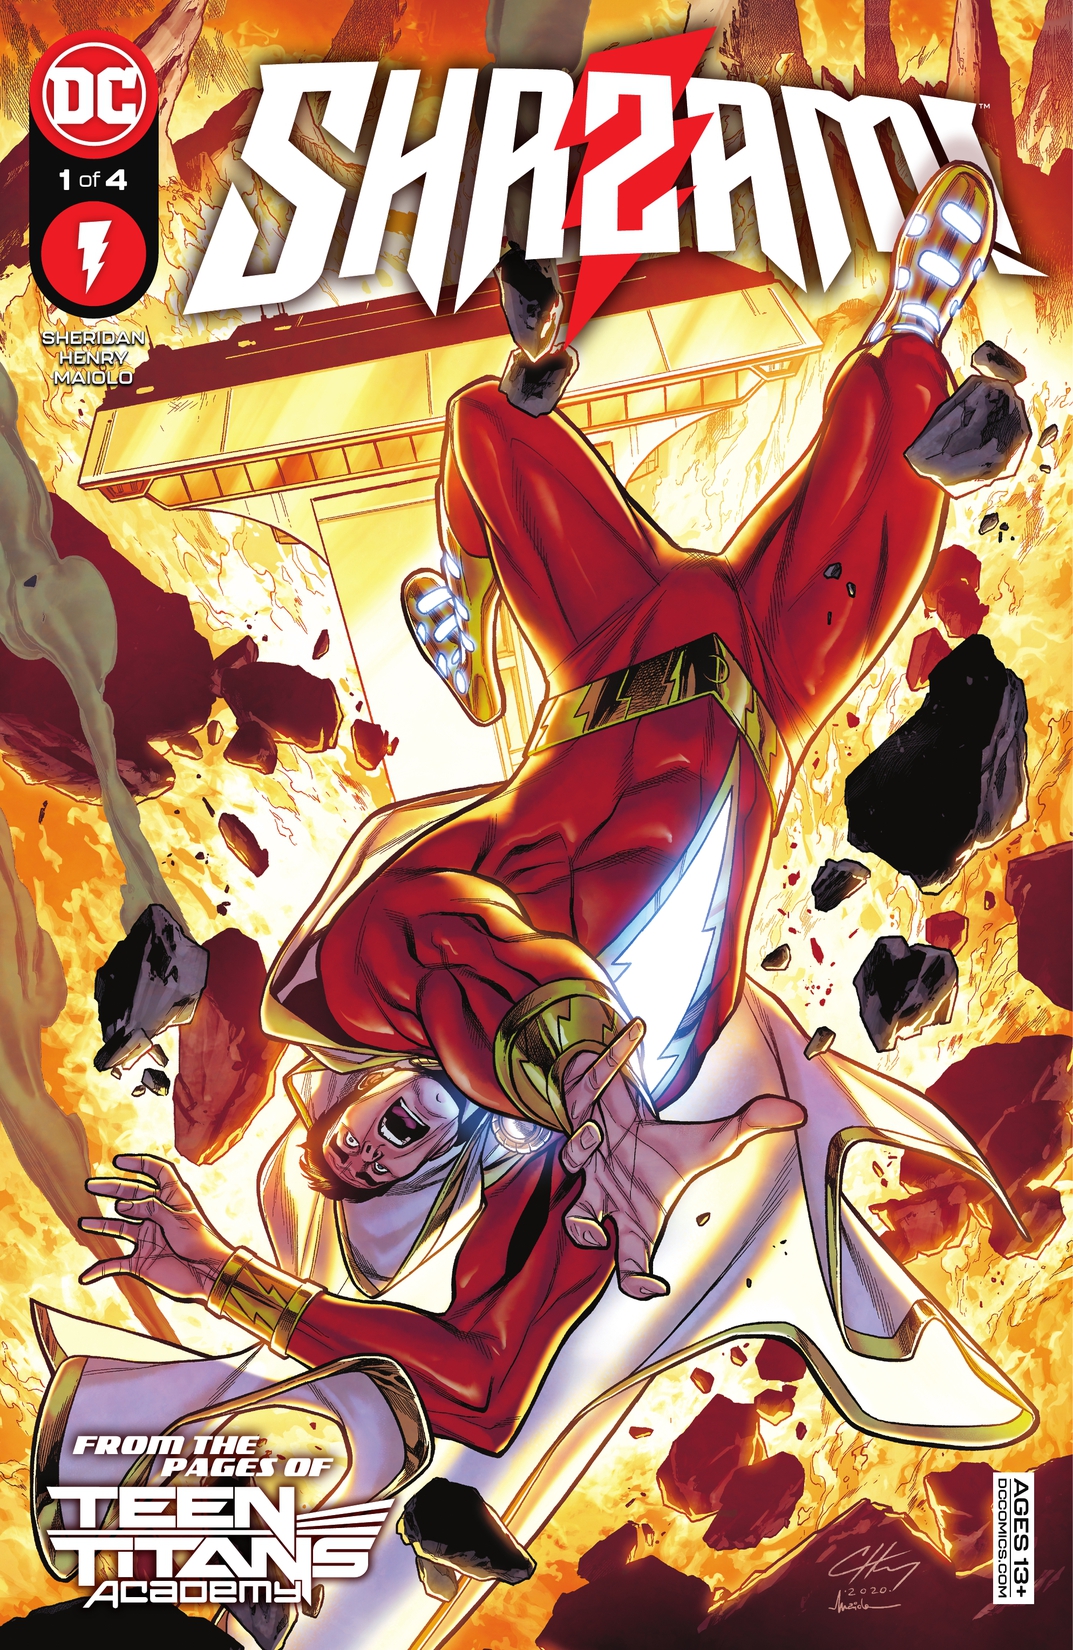 Shazam! #1 preview images